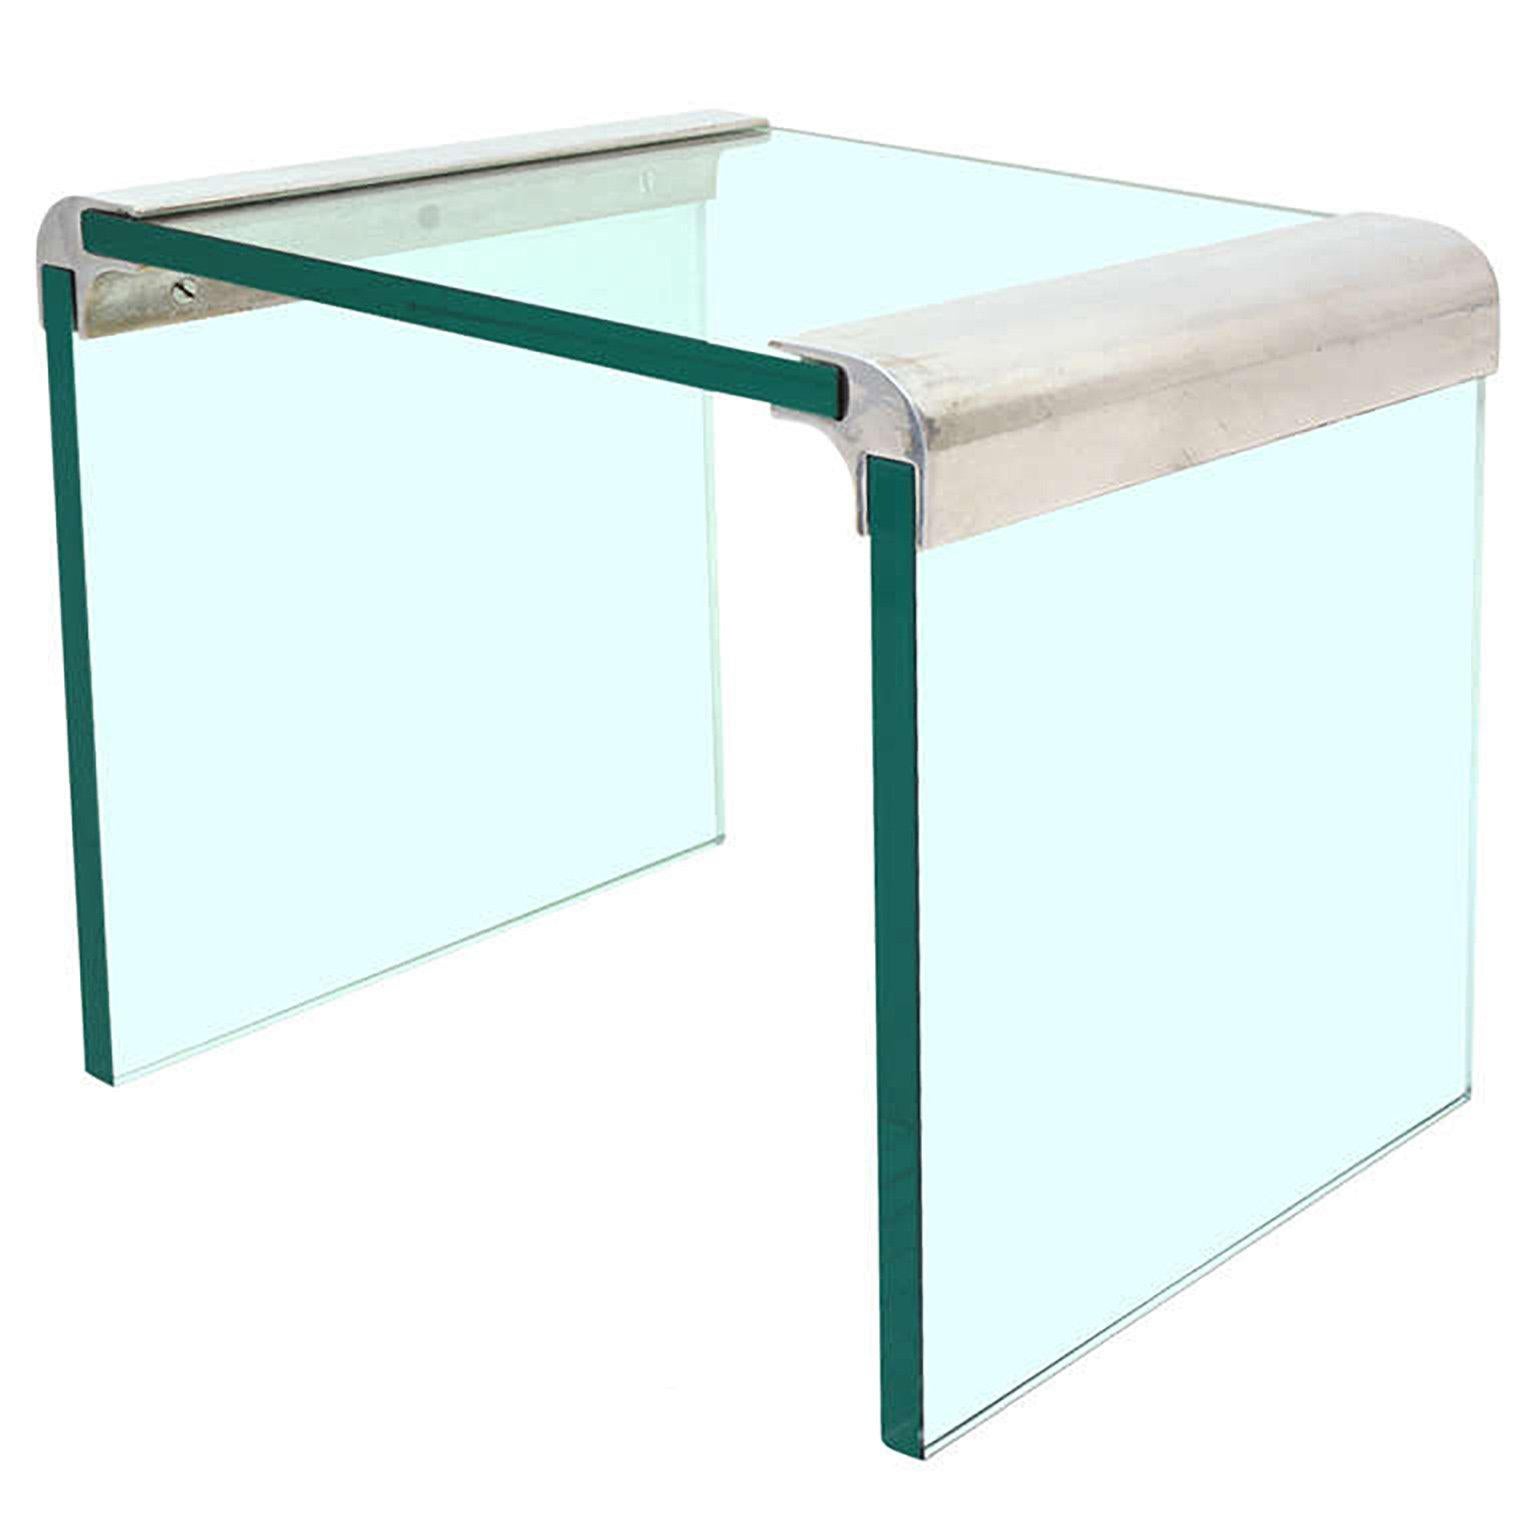 For your consideration a side table by PACE. Thick glass with green tones.